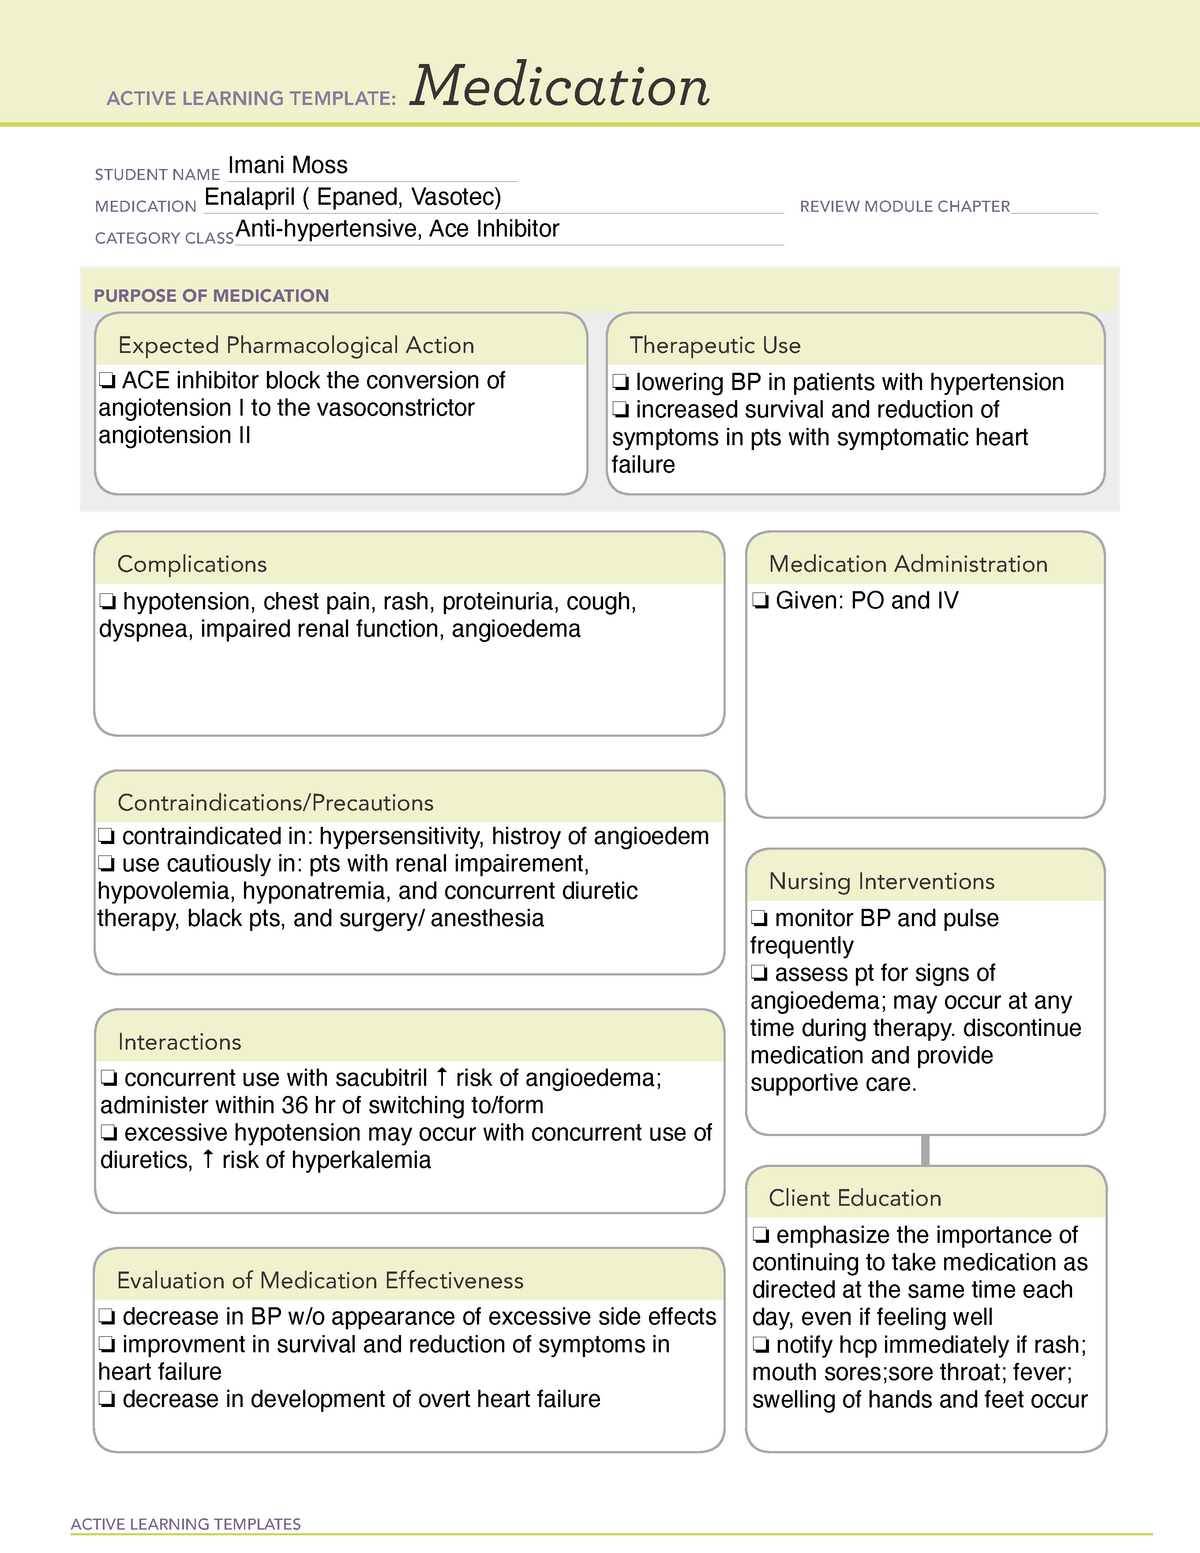 enalapril-n-a-active-learning-templates-medication-student-name